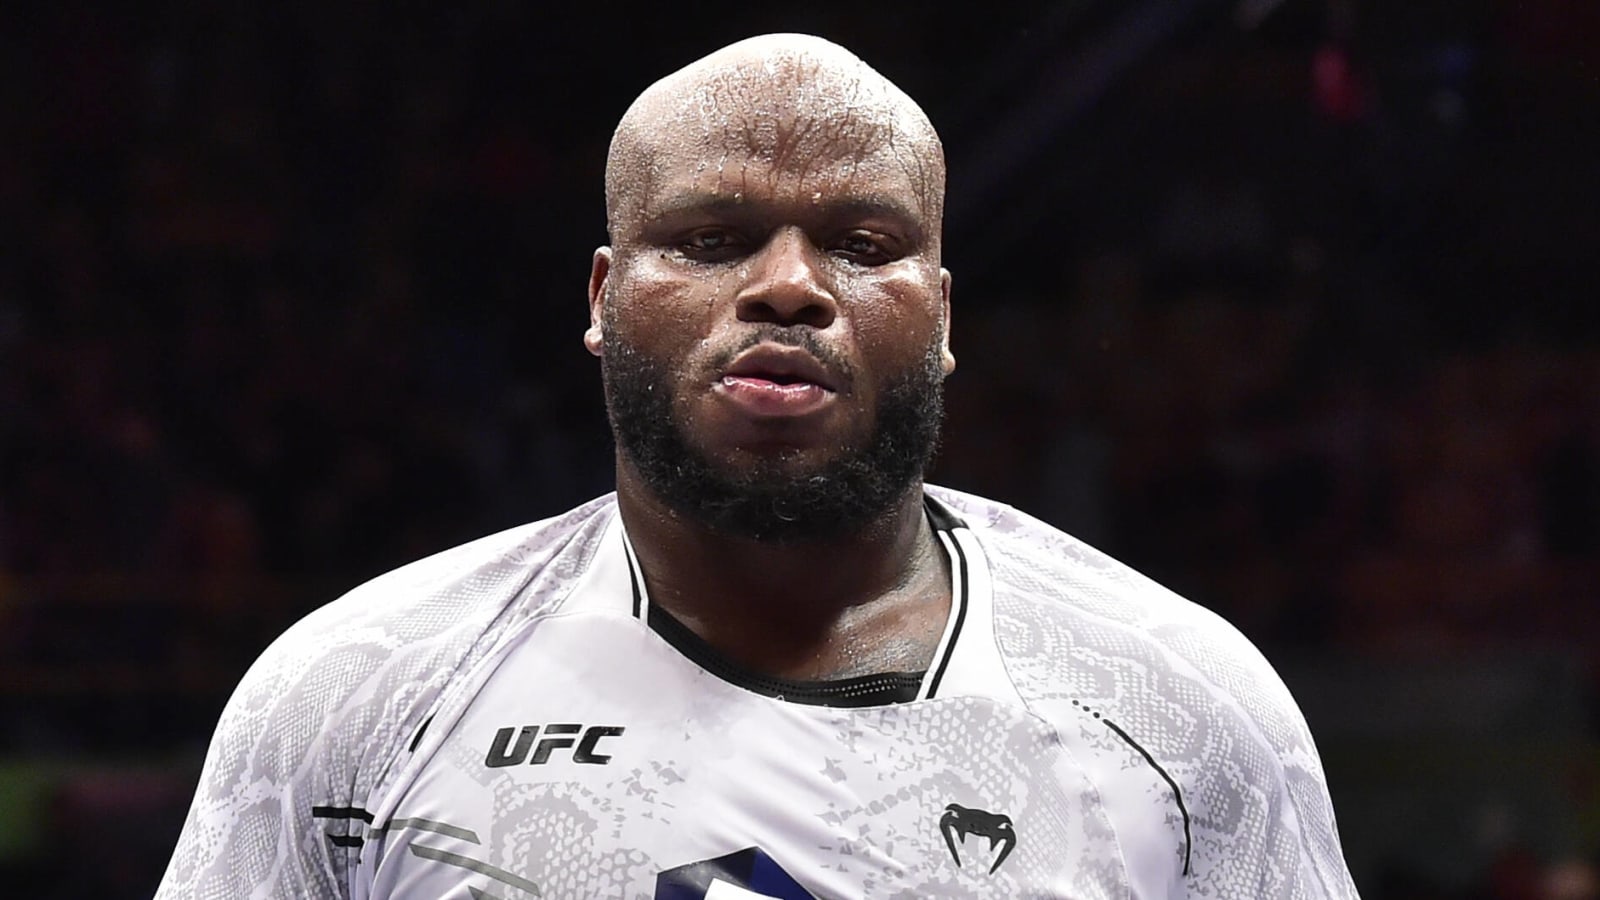 Derrick Lewis Removes Pants & Moons Crowd After Win at UFC Fight Night